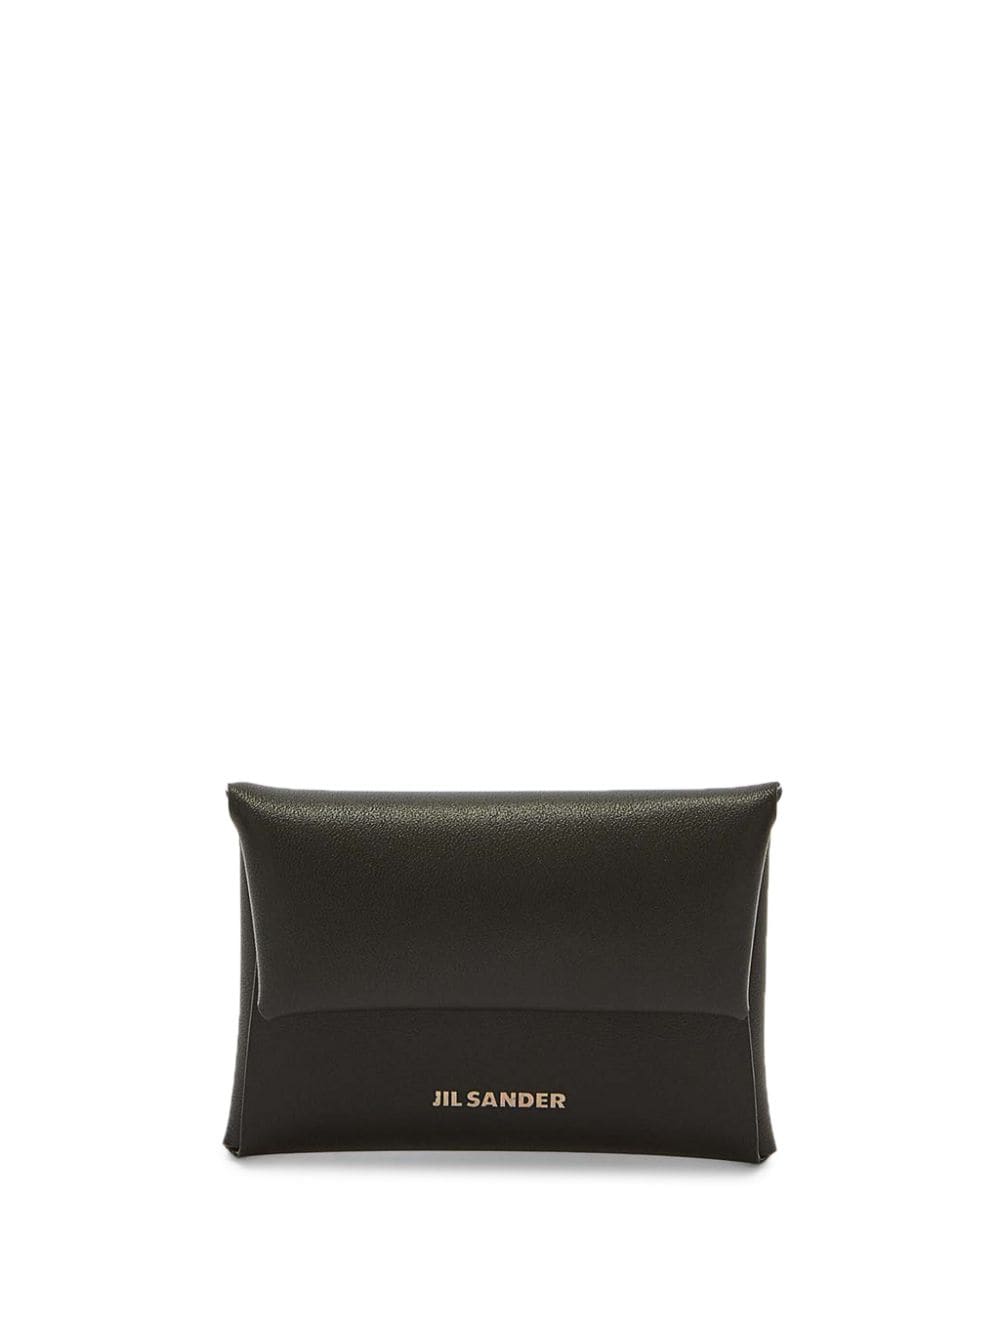 Jil Sander Leather Coin Purse In Black